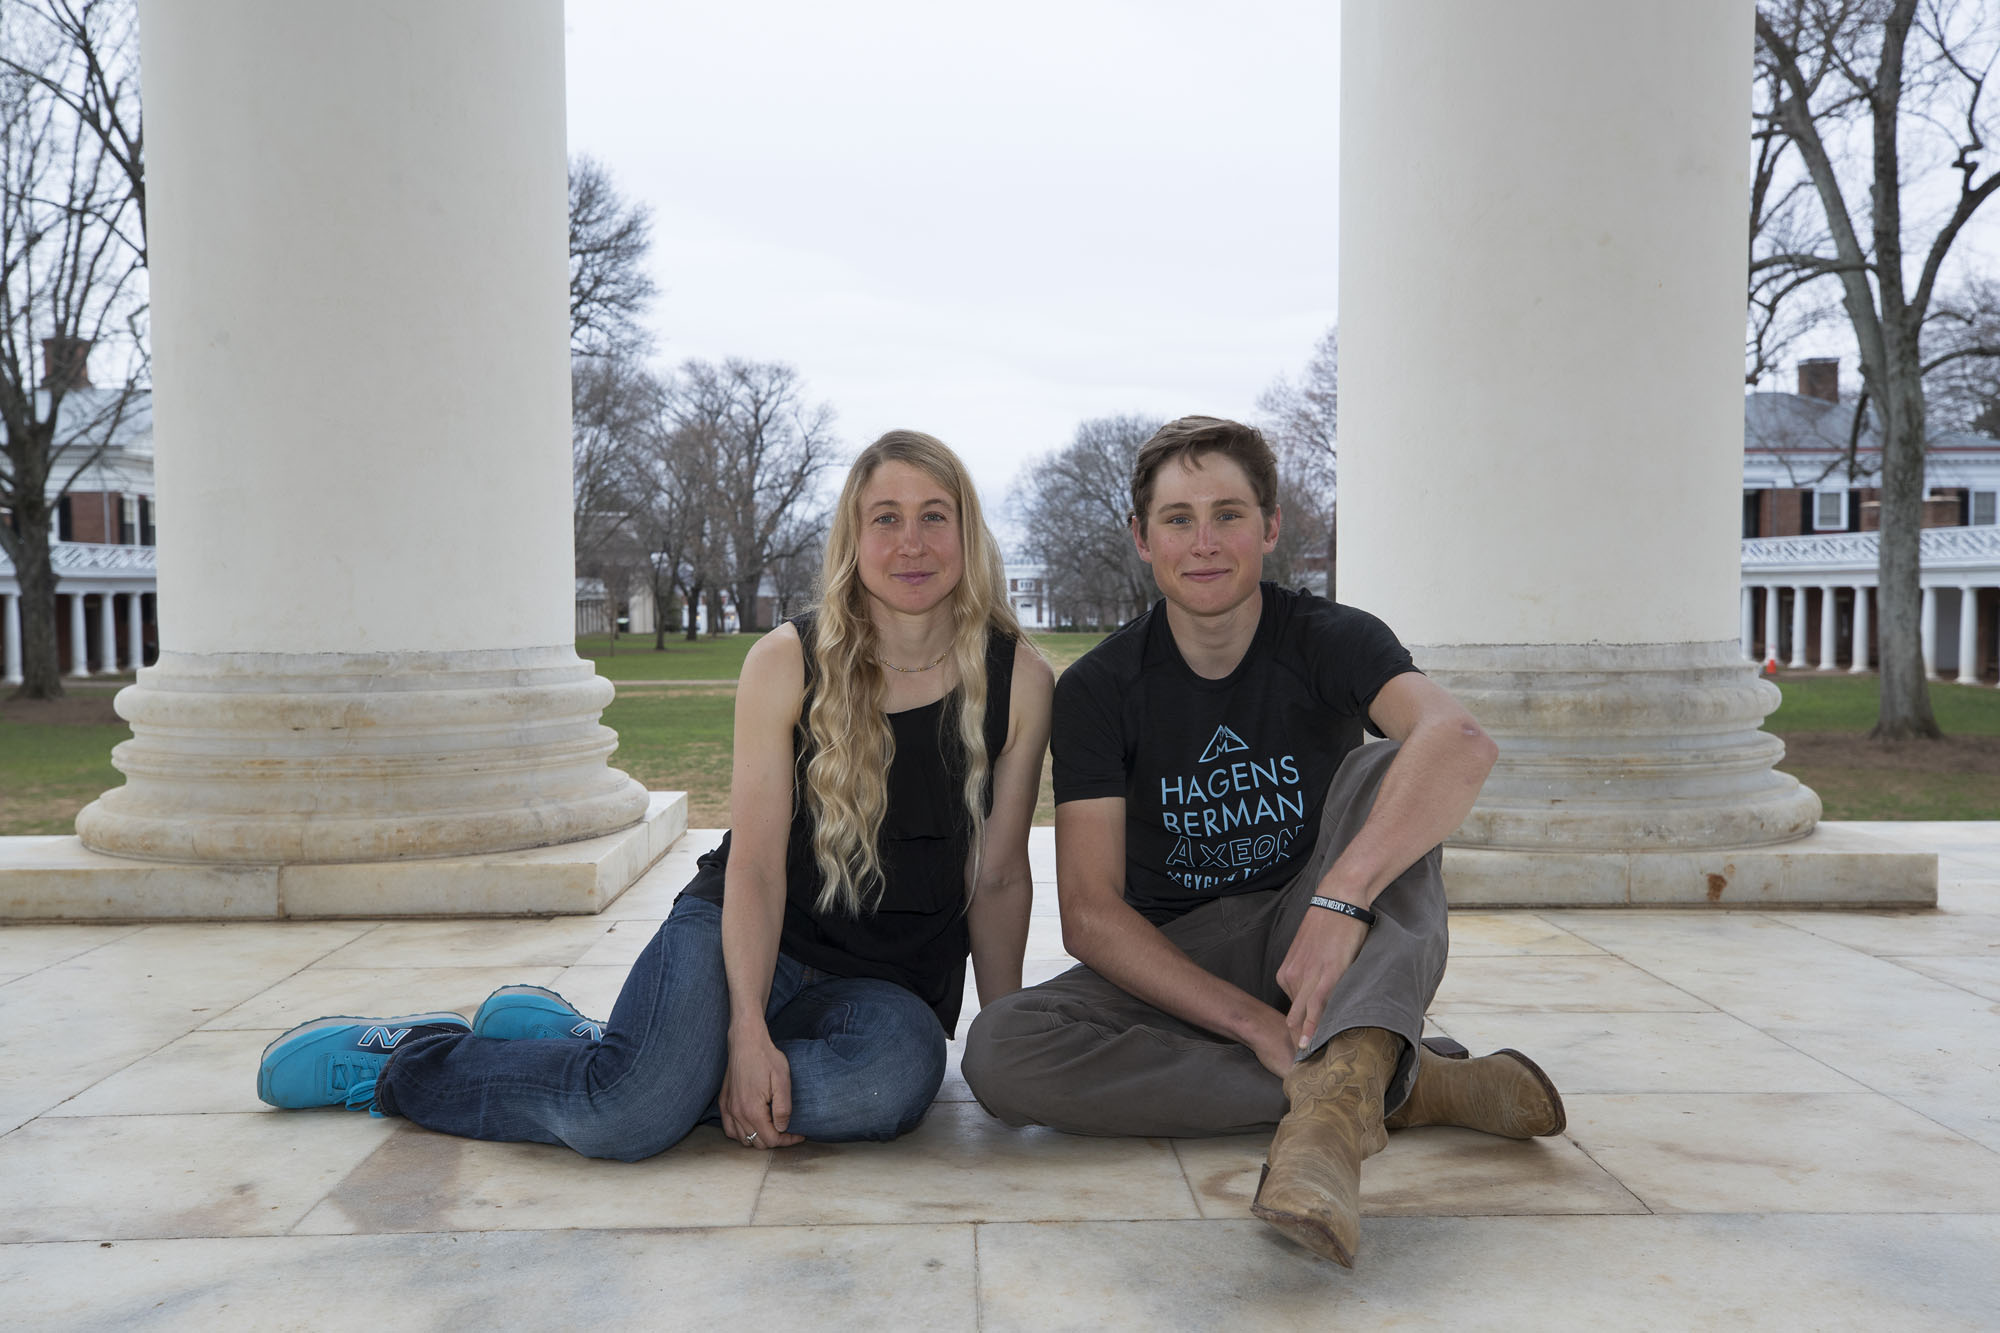 Dvorak, left, and Anderson, right, sit on the Rotunda stone smiling at the camera